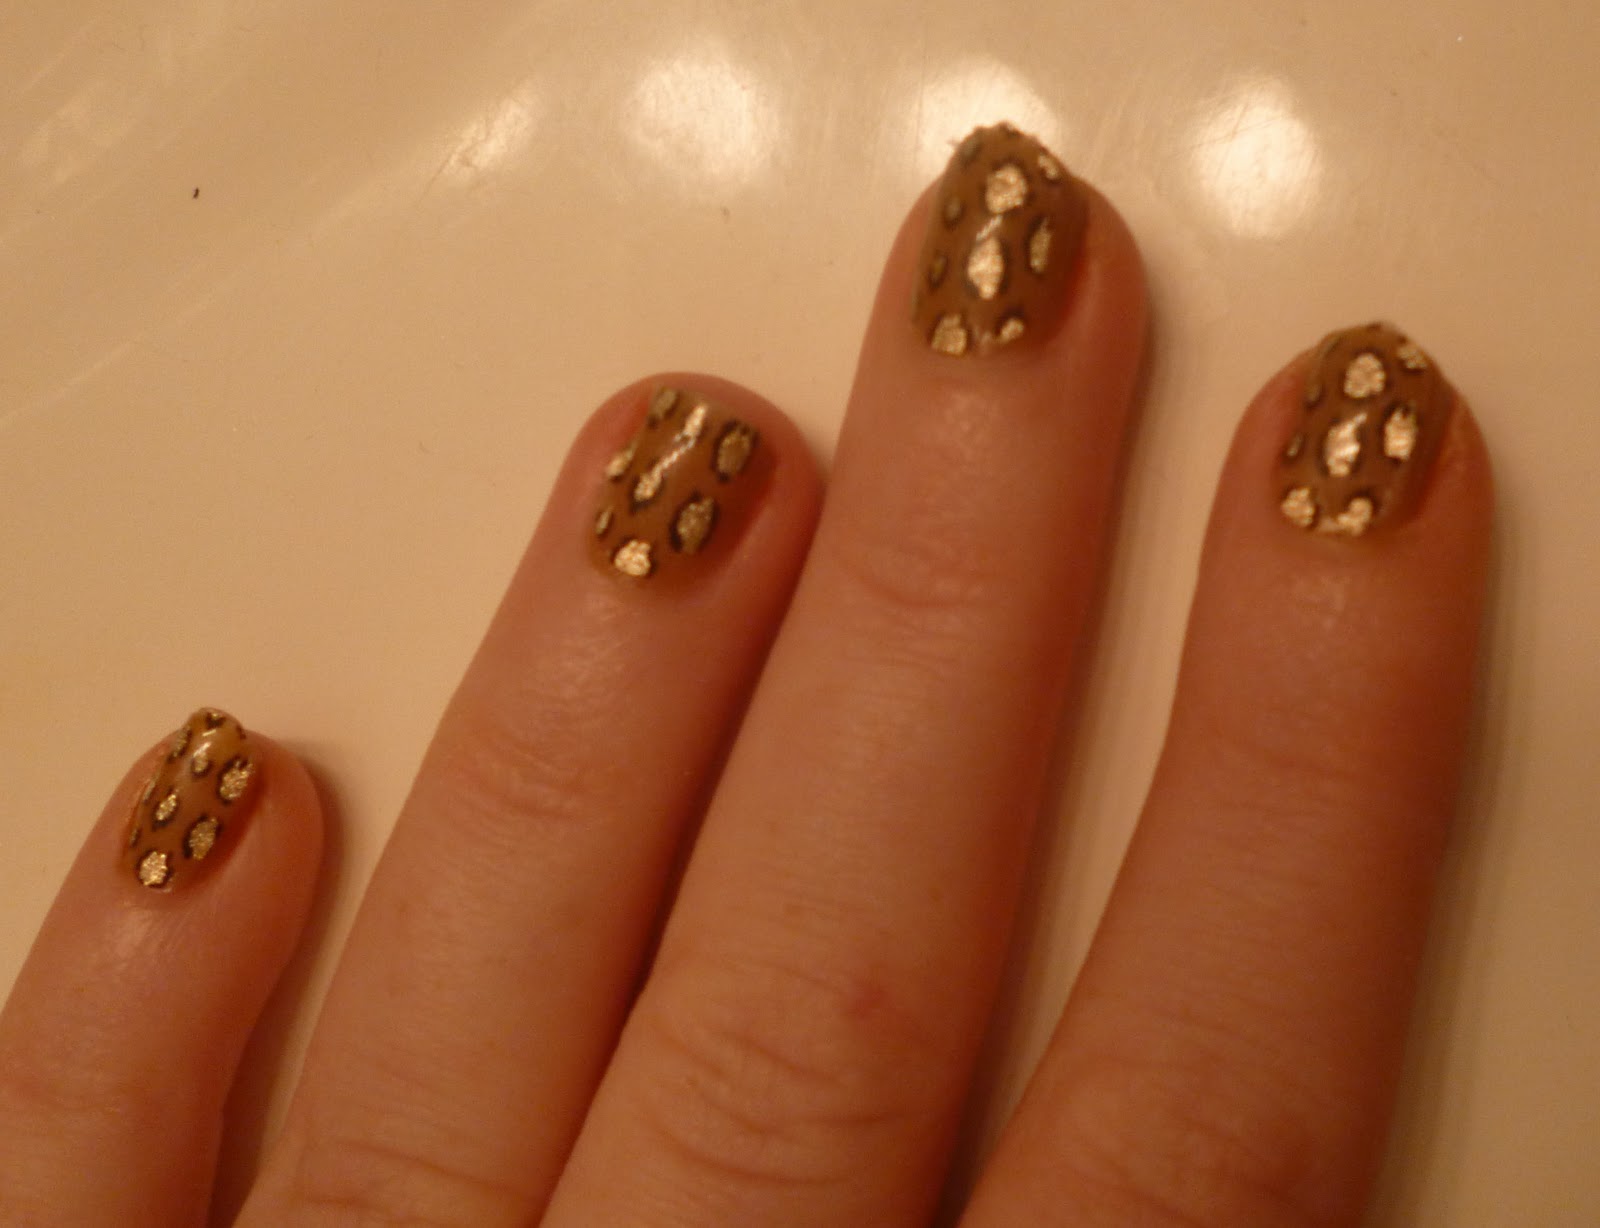 Some of the appliques were too long for my nail so I tried to file them